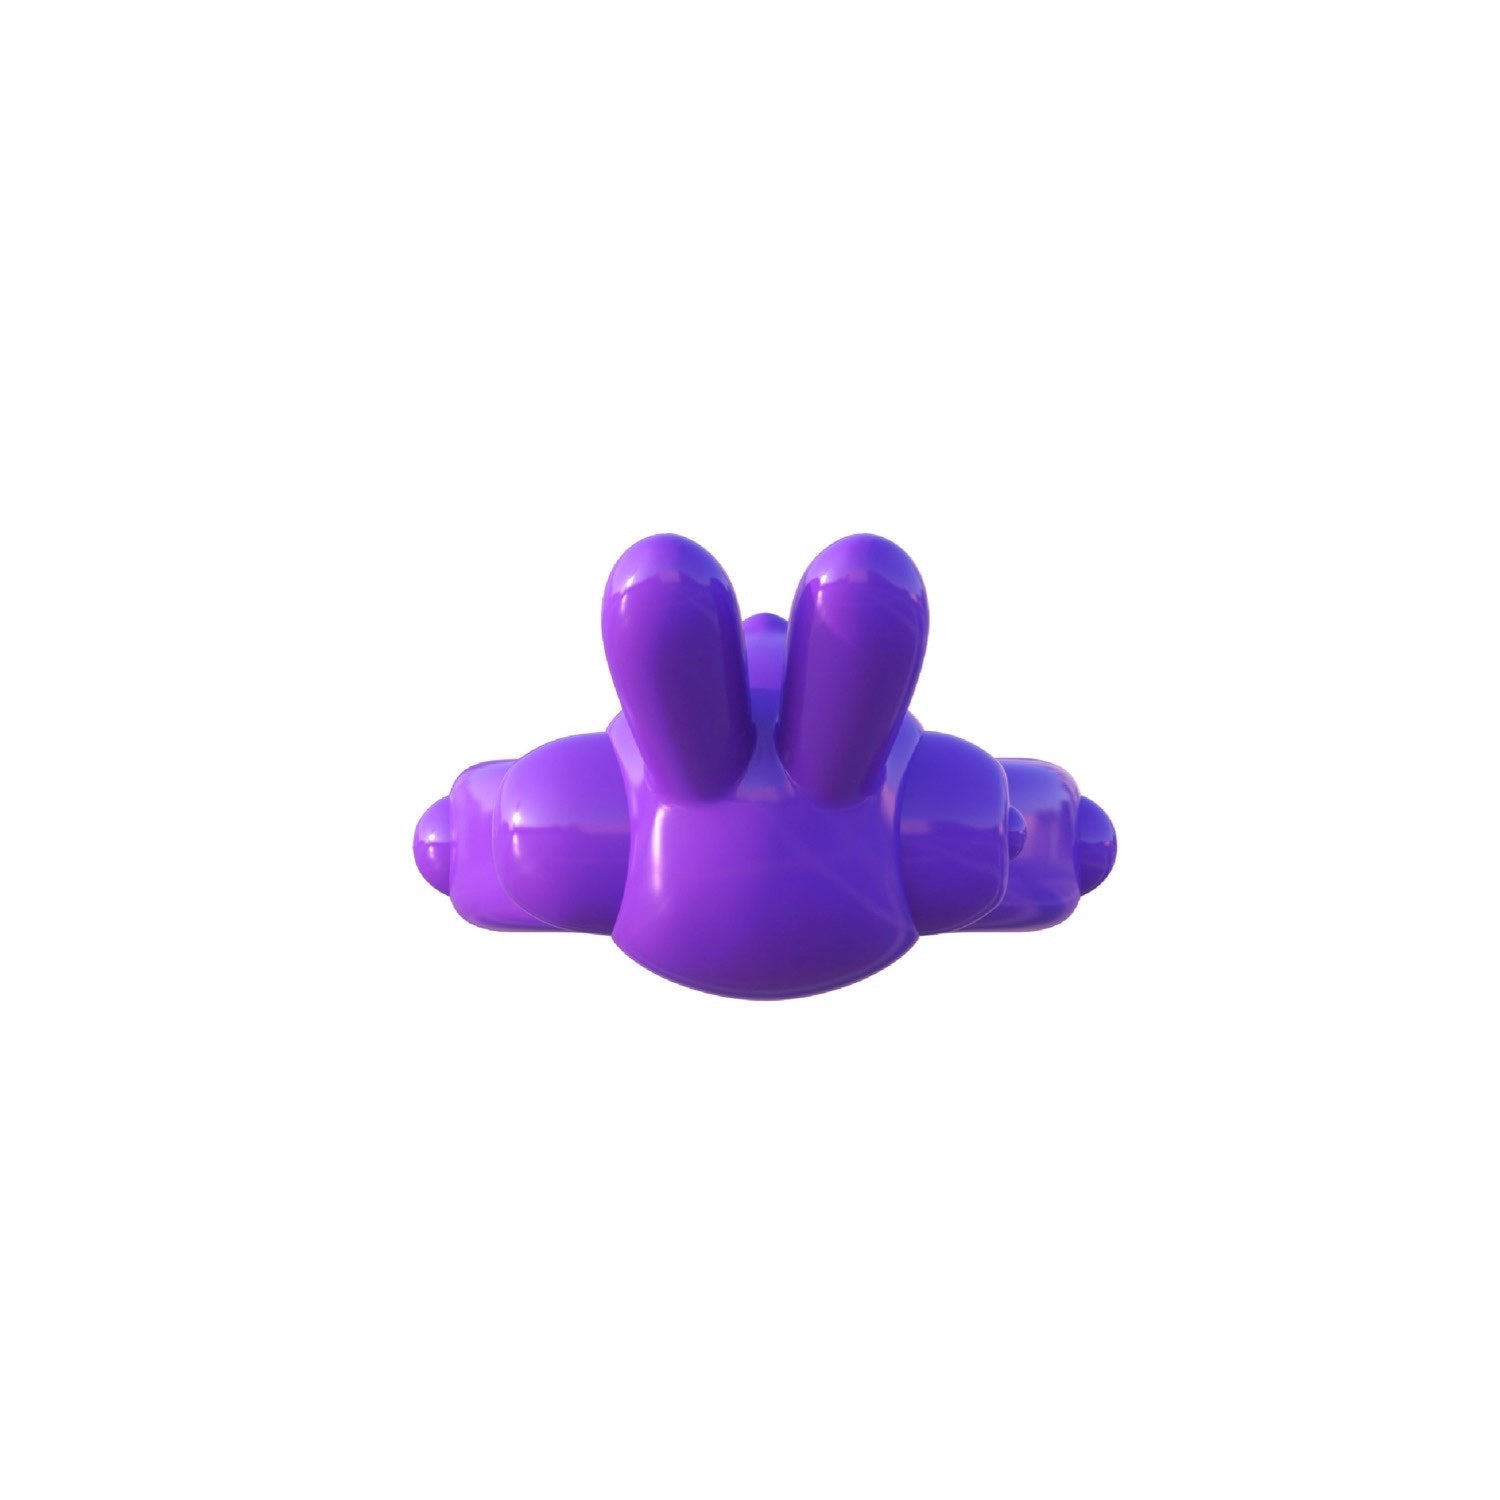 Fantasy C-Ringz Ultimate Rabbit Ring - Purple Vibrating Cock Ring by Pipedream